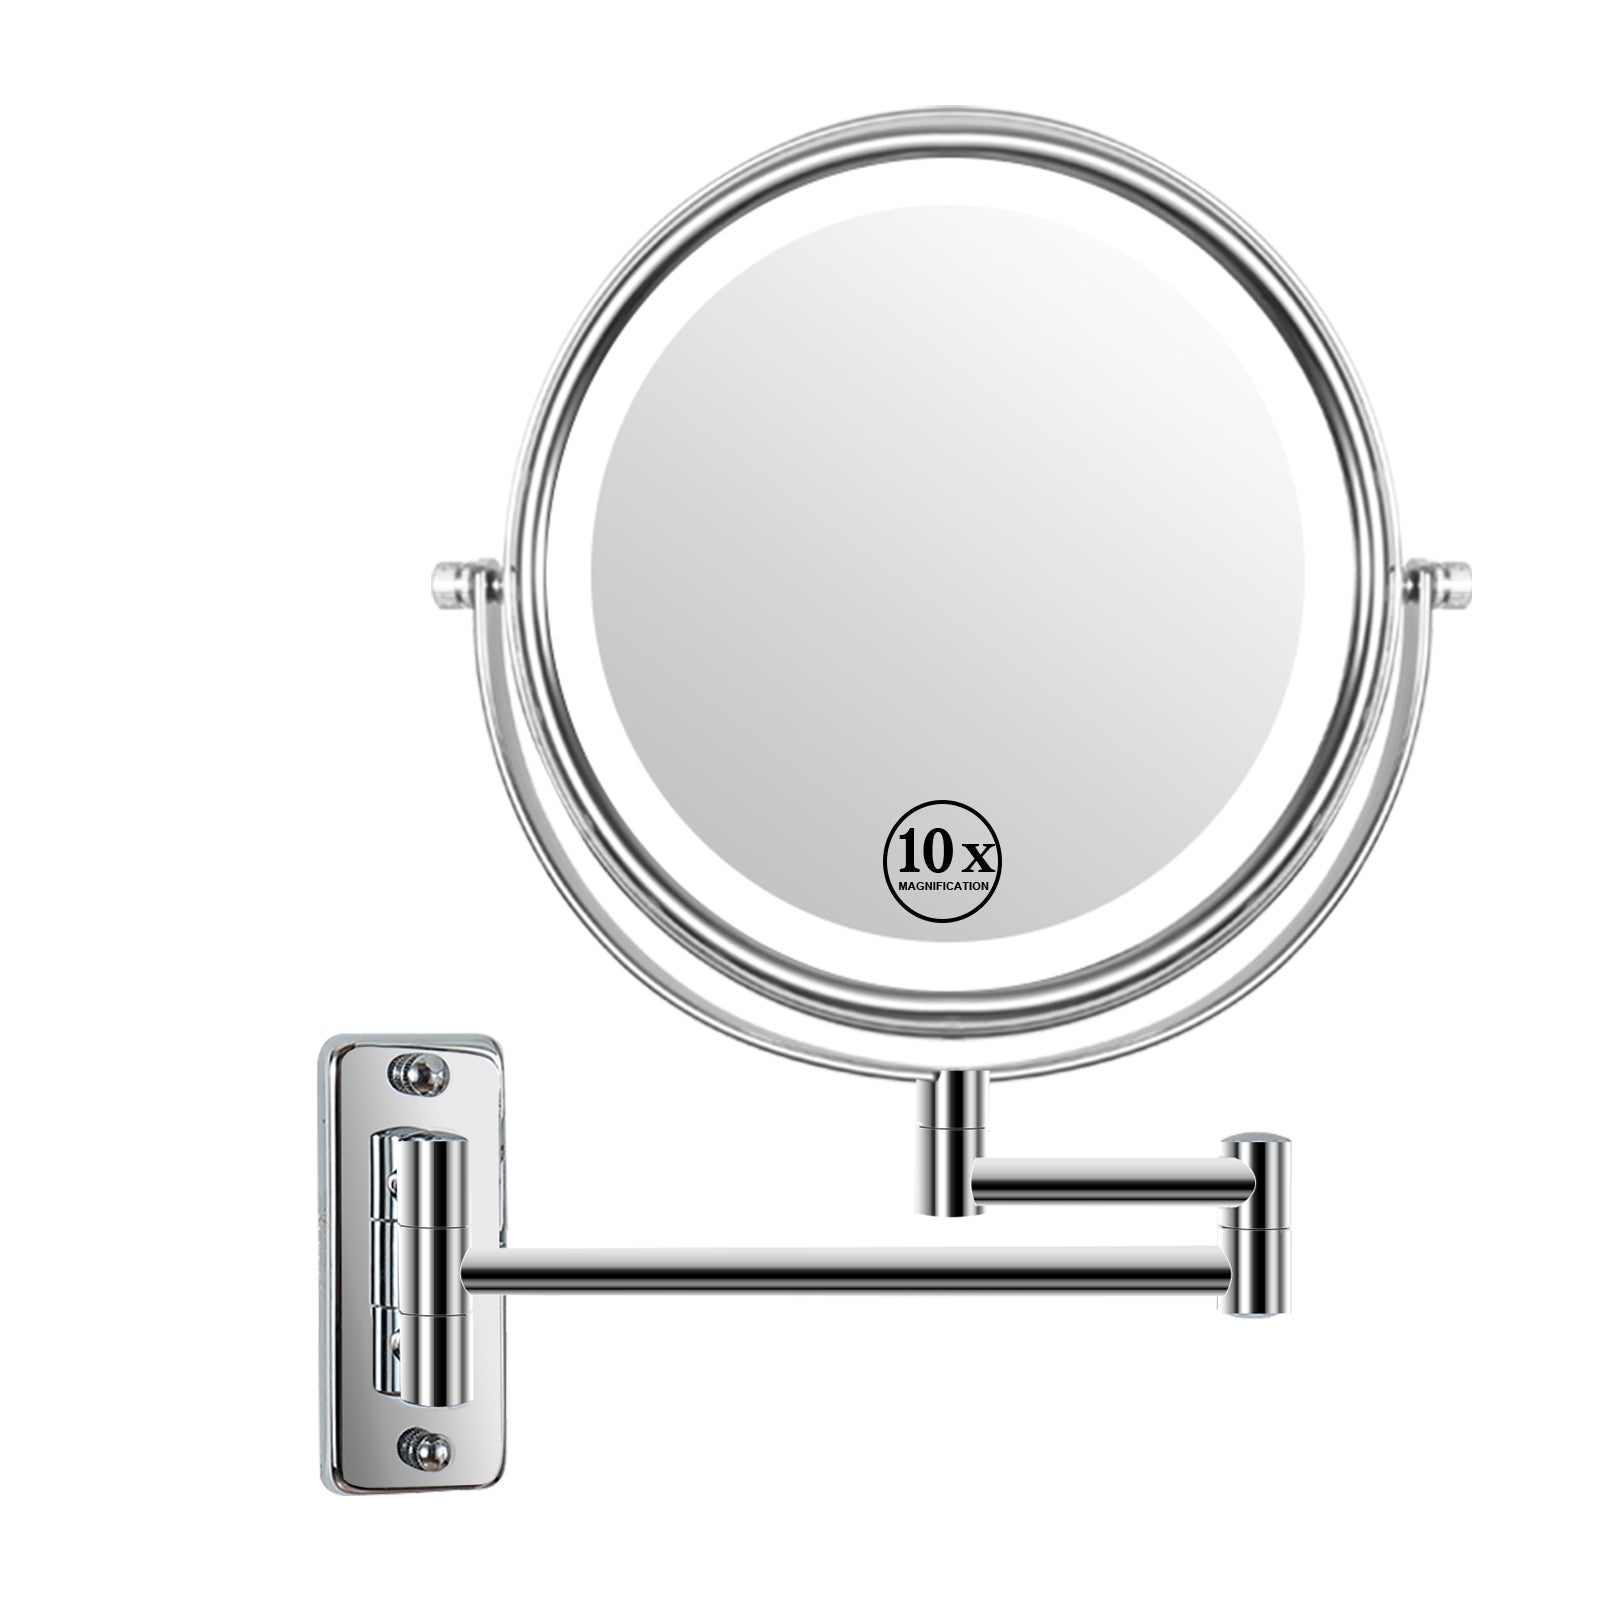 8-inch Wall Mounted Makeup Vanity Mirror, 3 colors Led lights, 1X/10X Magnification Mirror, 360° Swivel with Extension Arm (Chrome Finish) - Tonkn